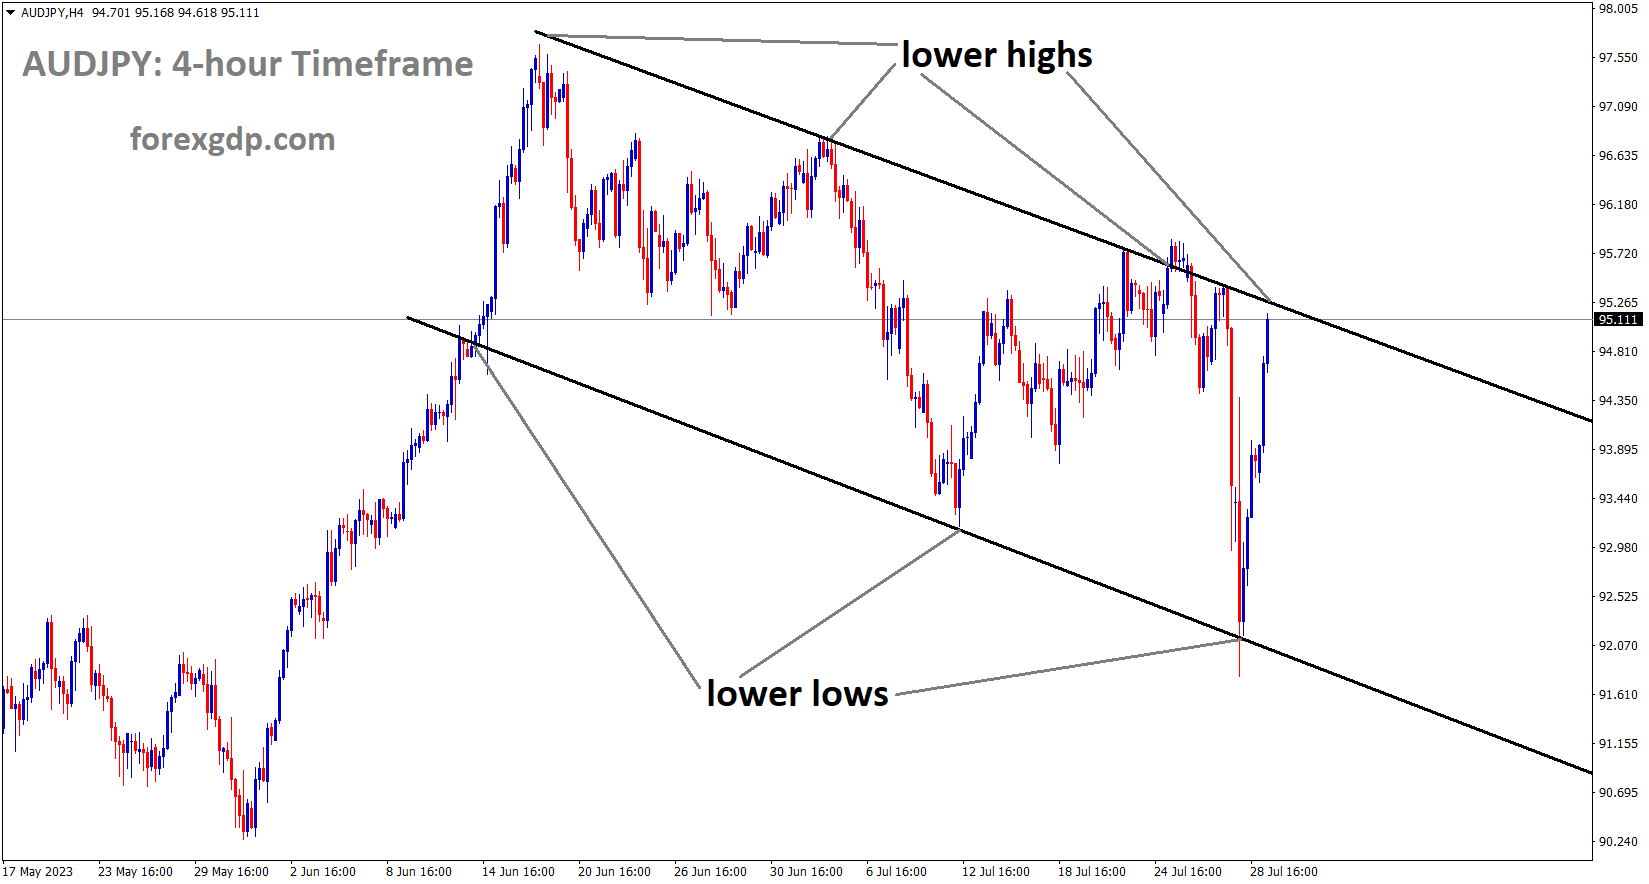 AUDJPY is moving in the Descending channel and the market has reached the lower high area of the channel 2